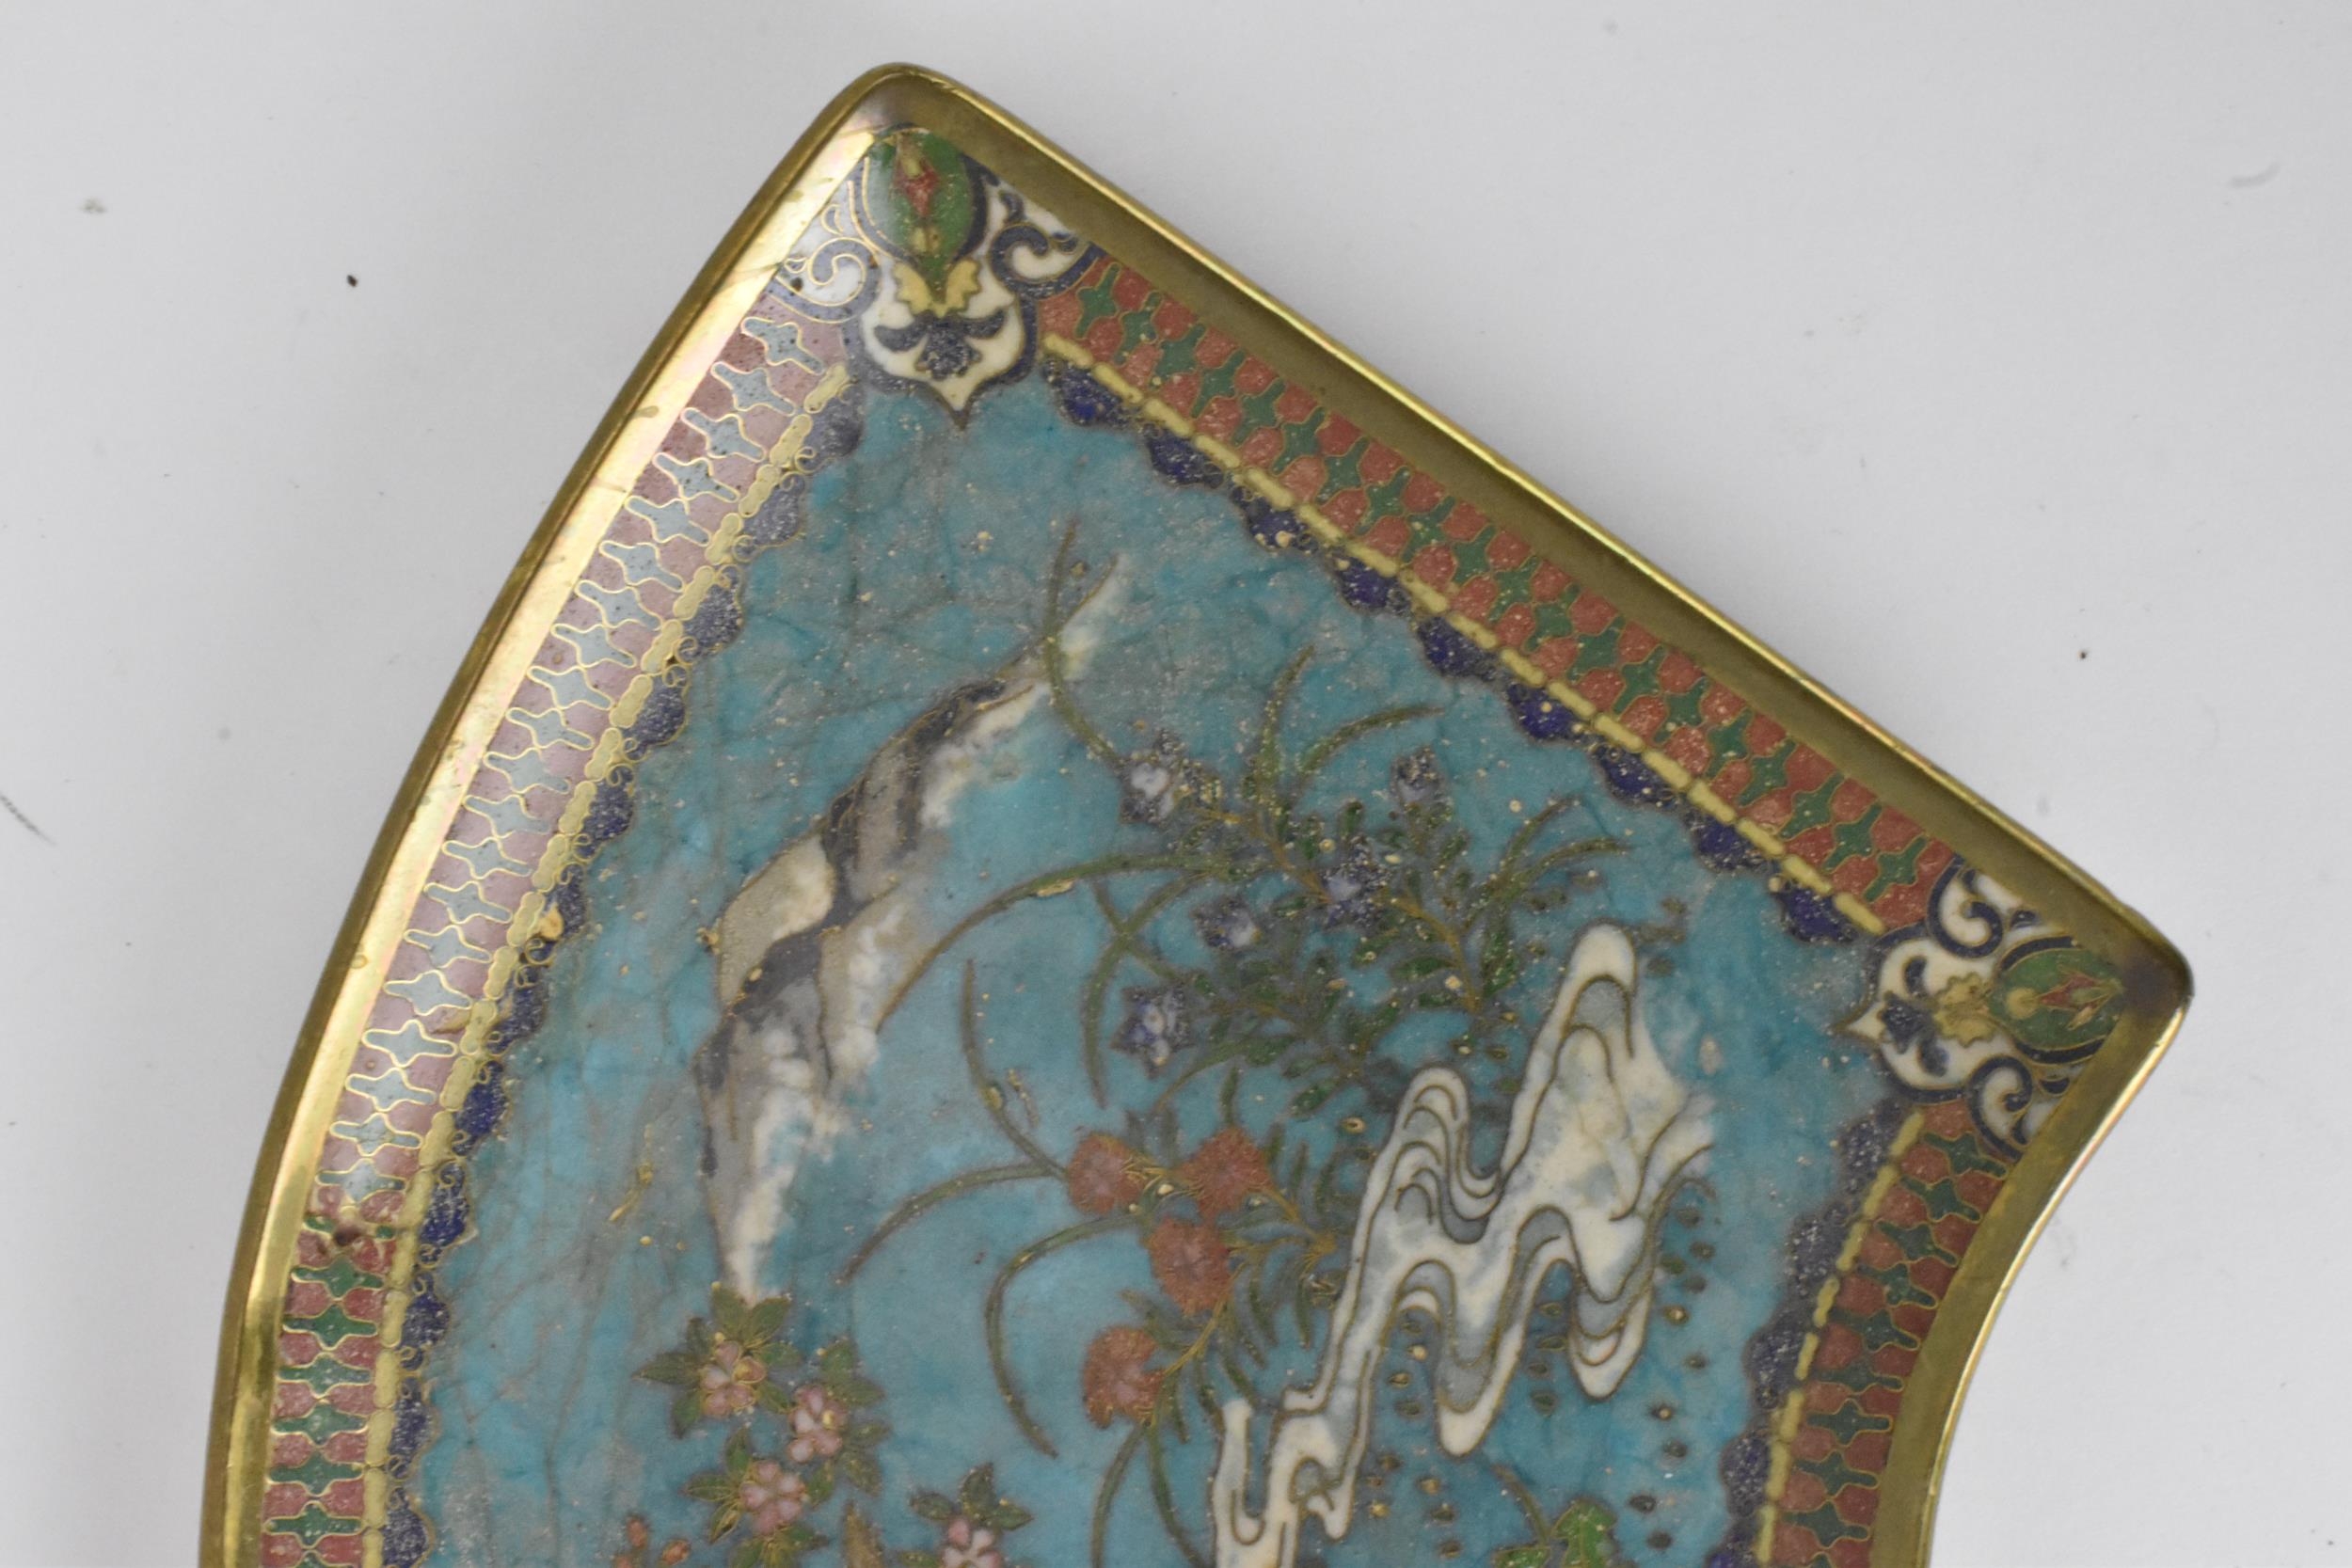 A Japanese Meiji period cloisonne serving dish, circa 1880, decorated with central birds among - Image 2 of 8